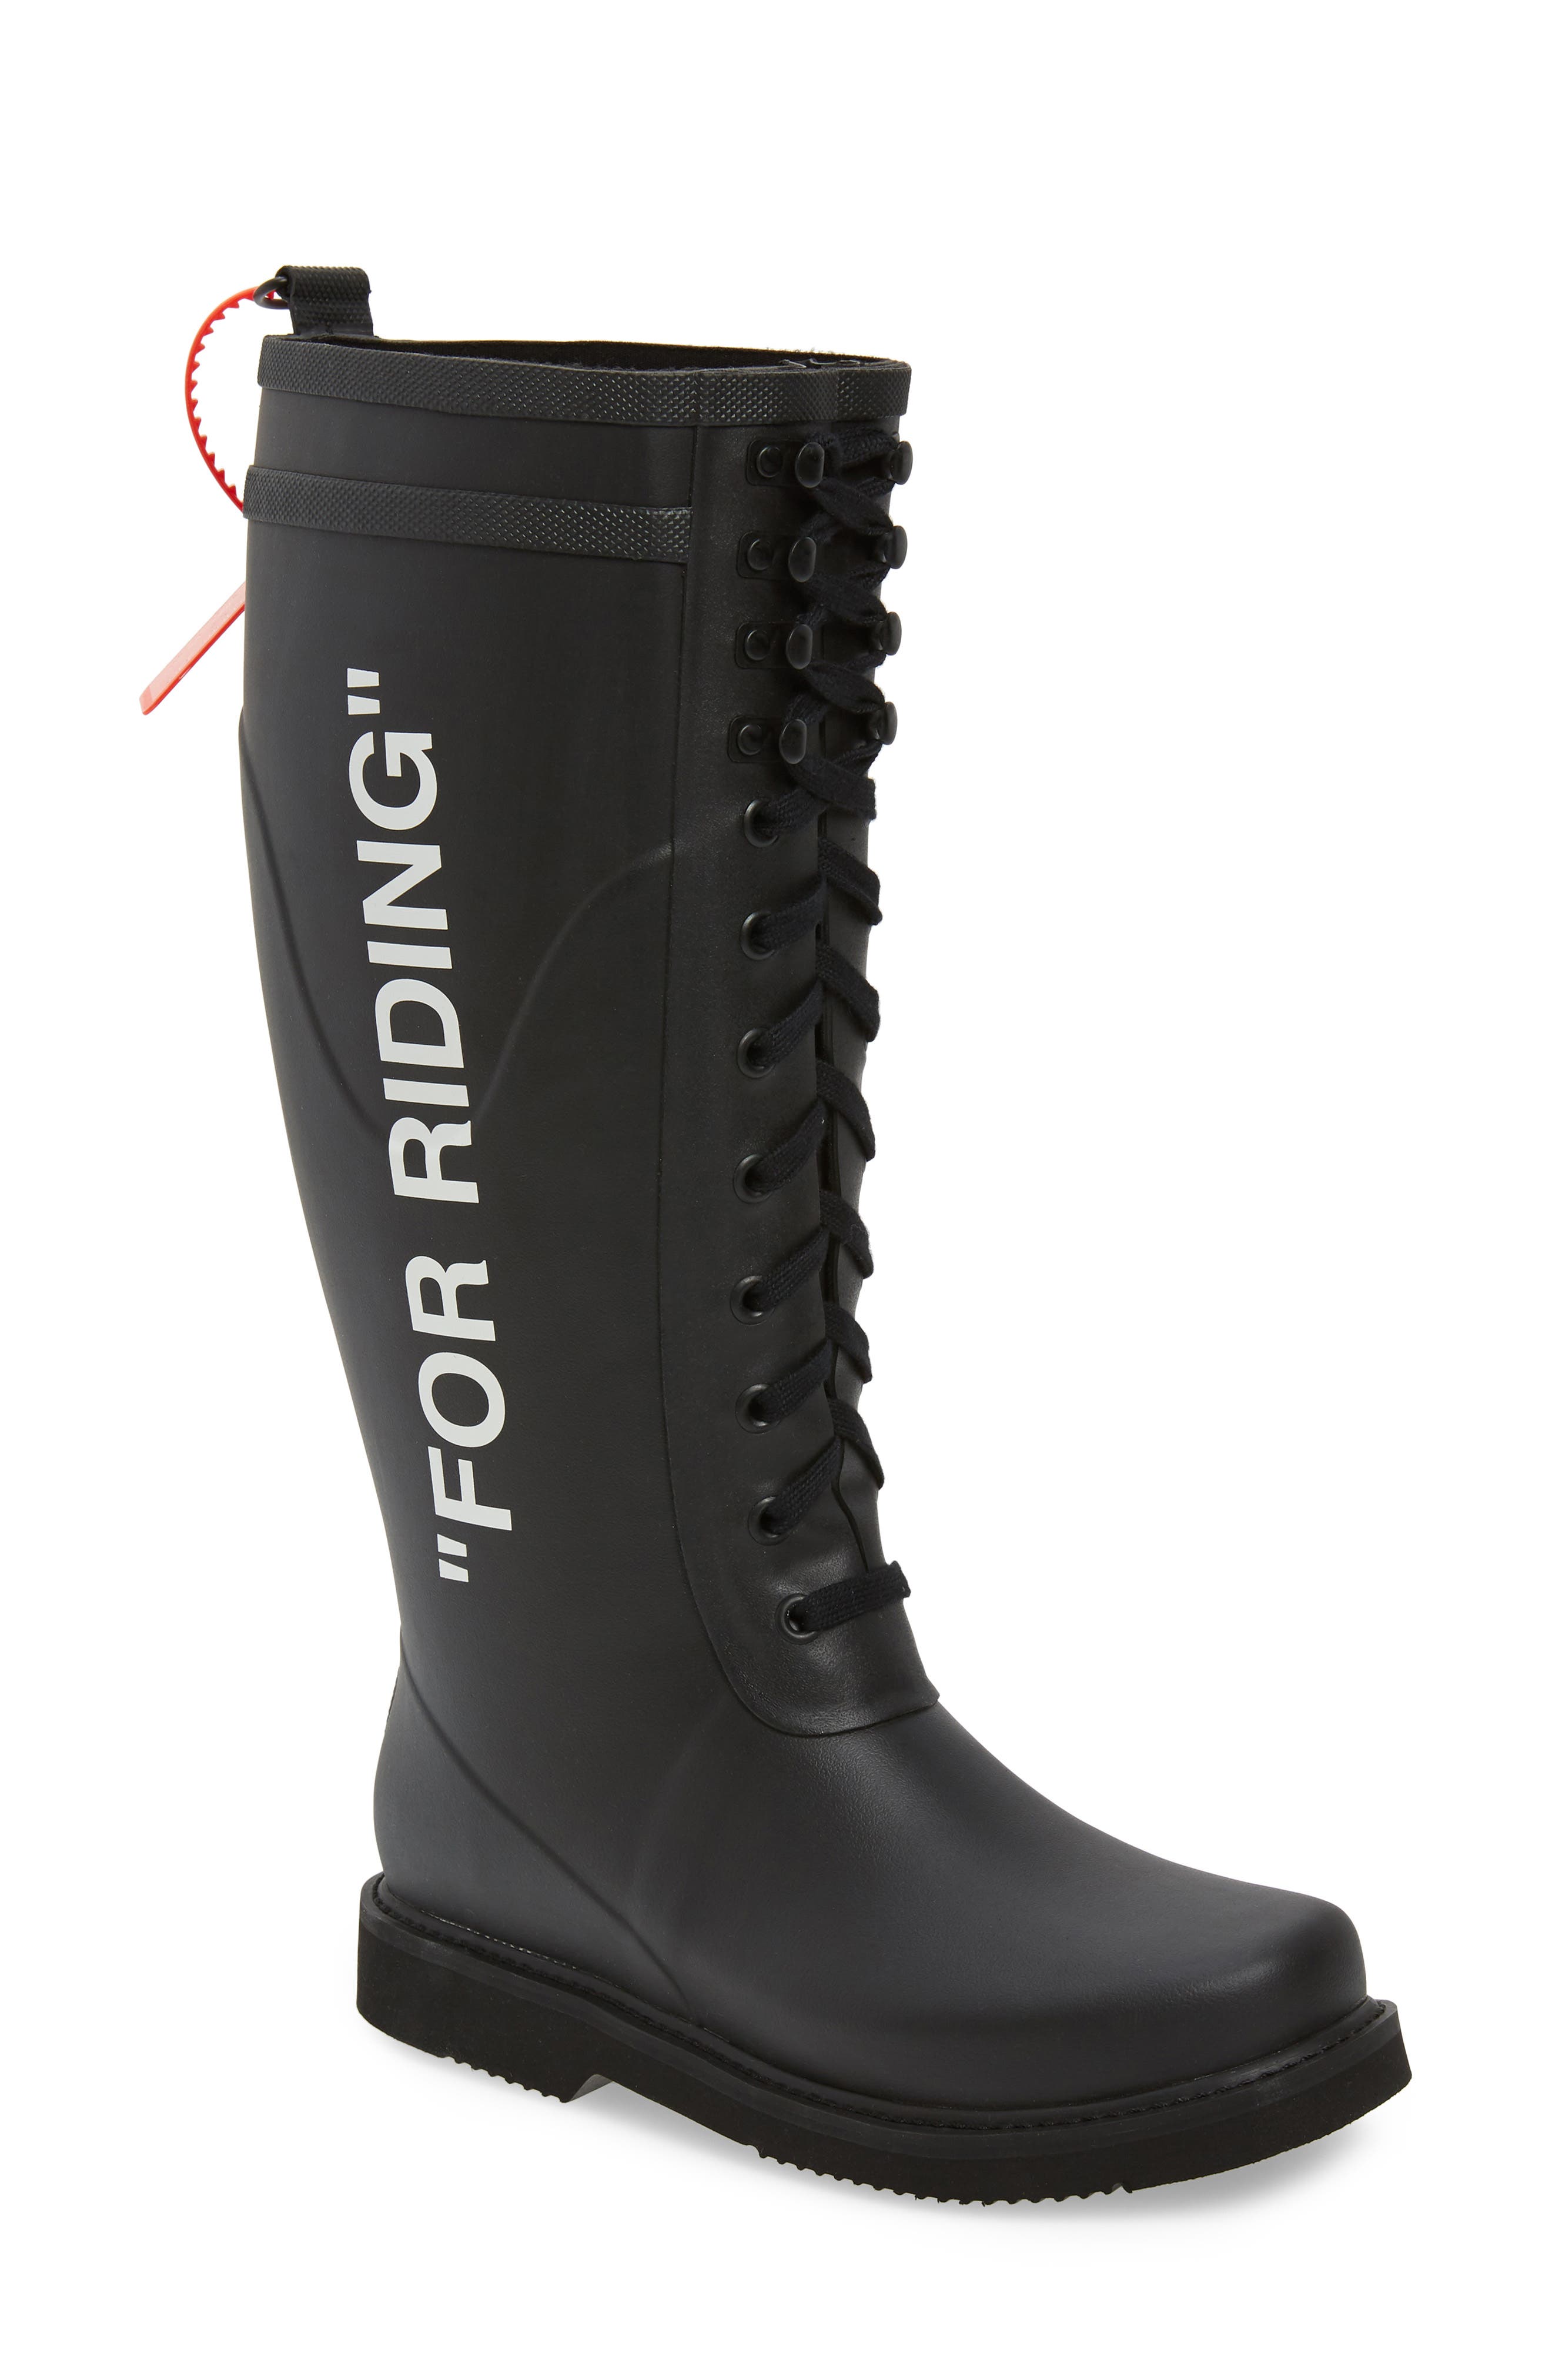 off white wellington boots